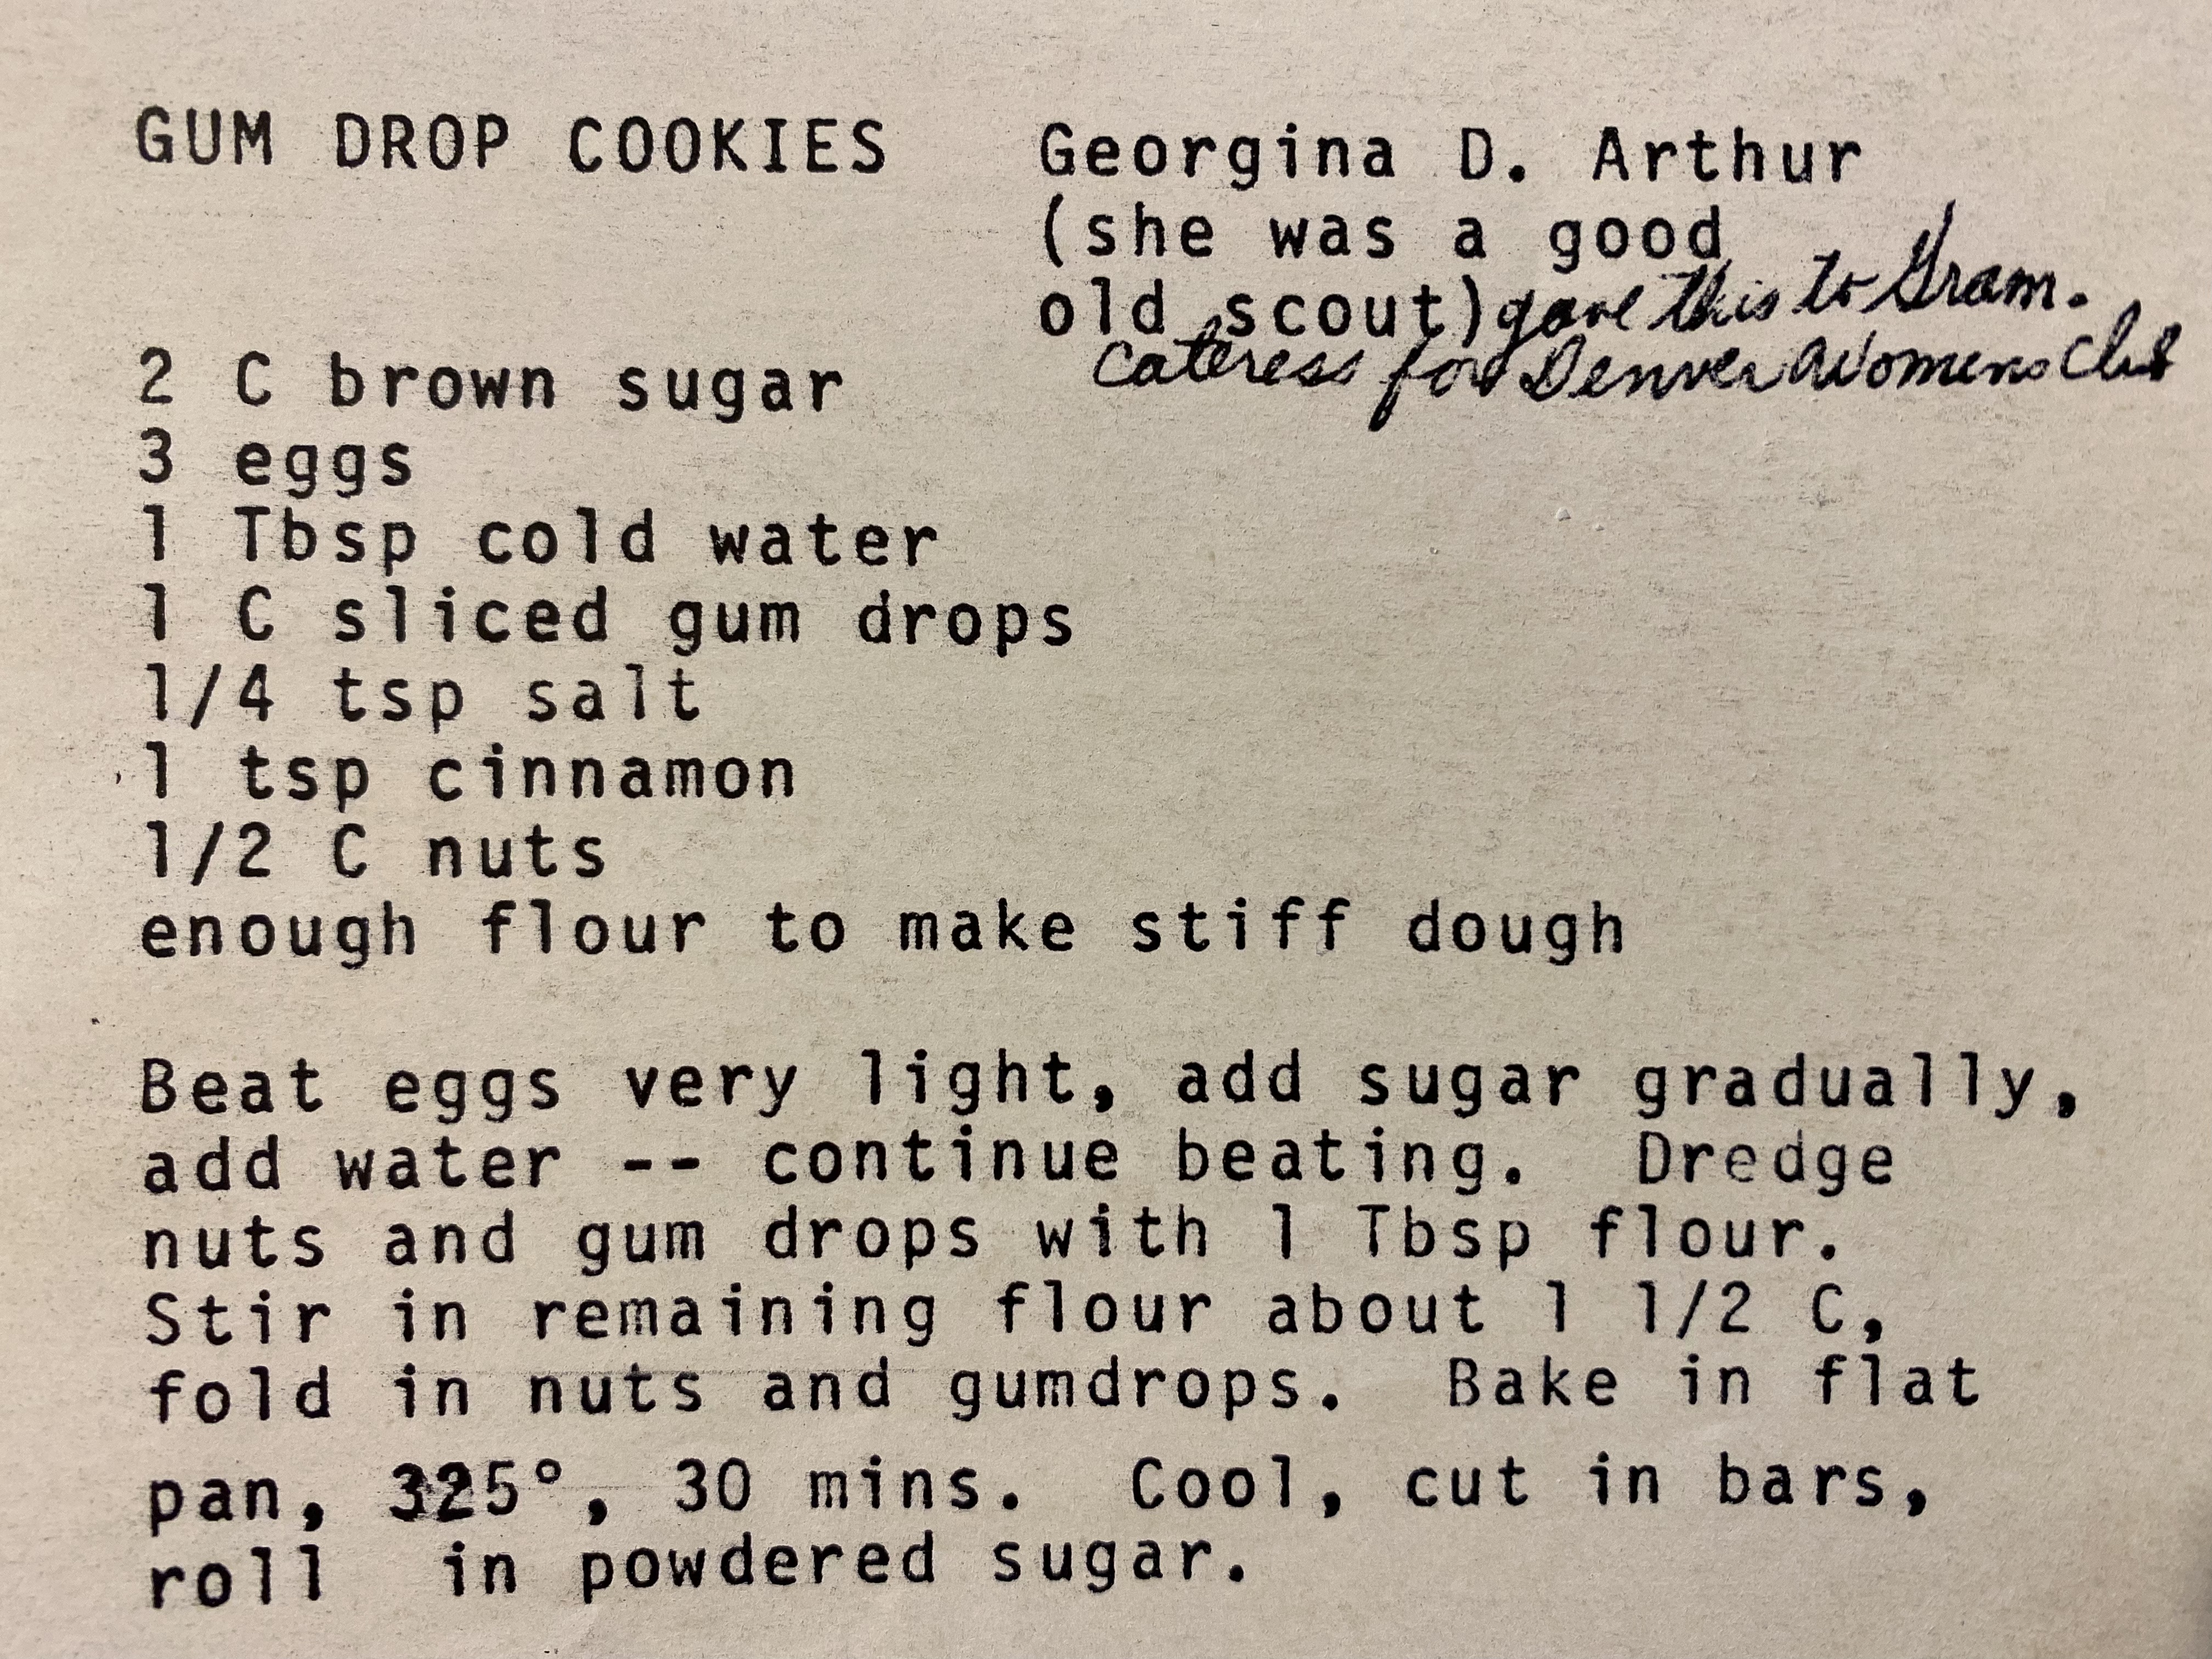 Image of a cookie recipe scanned from a cookbook. The recipe has been typed and there is a handwritten note on the page, denoting that the recipe came from  "Georgina D. Arthur (she was a good old scout) gave this to Gram. Cateress for Denver Womens Club."